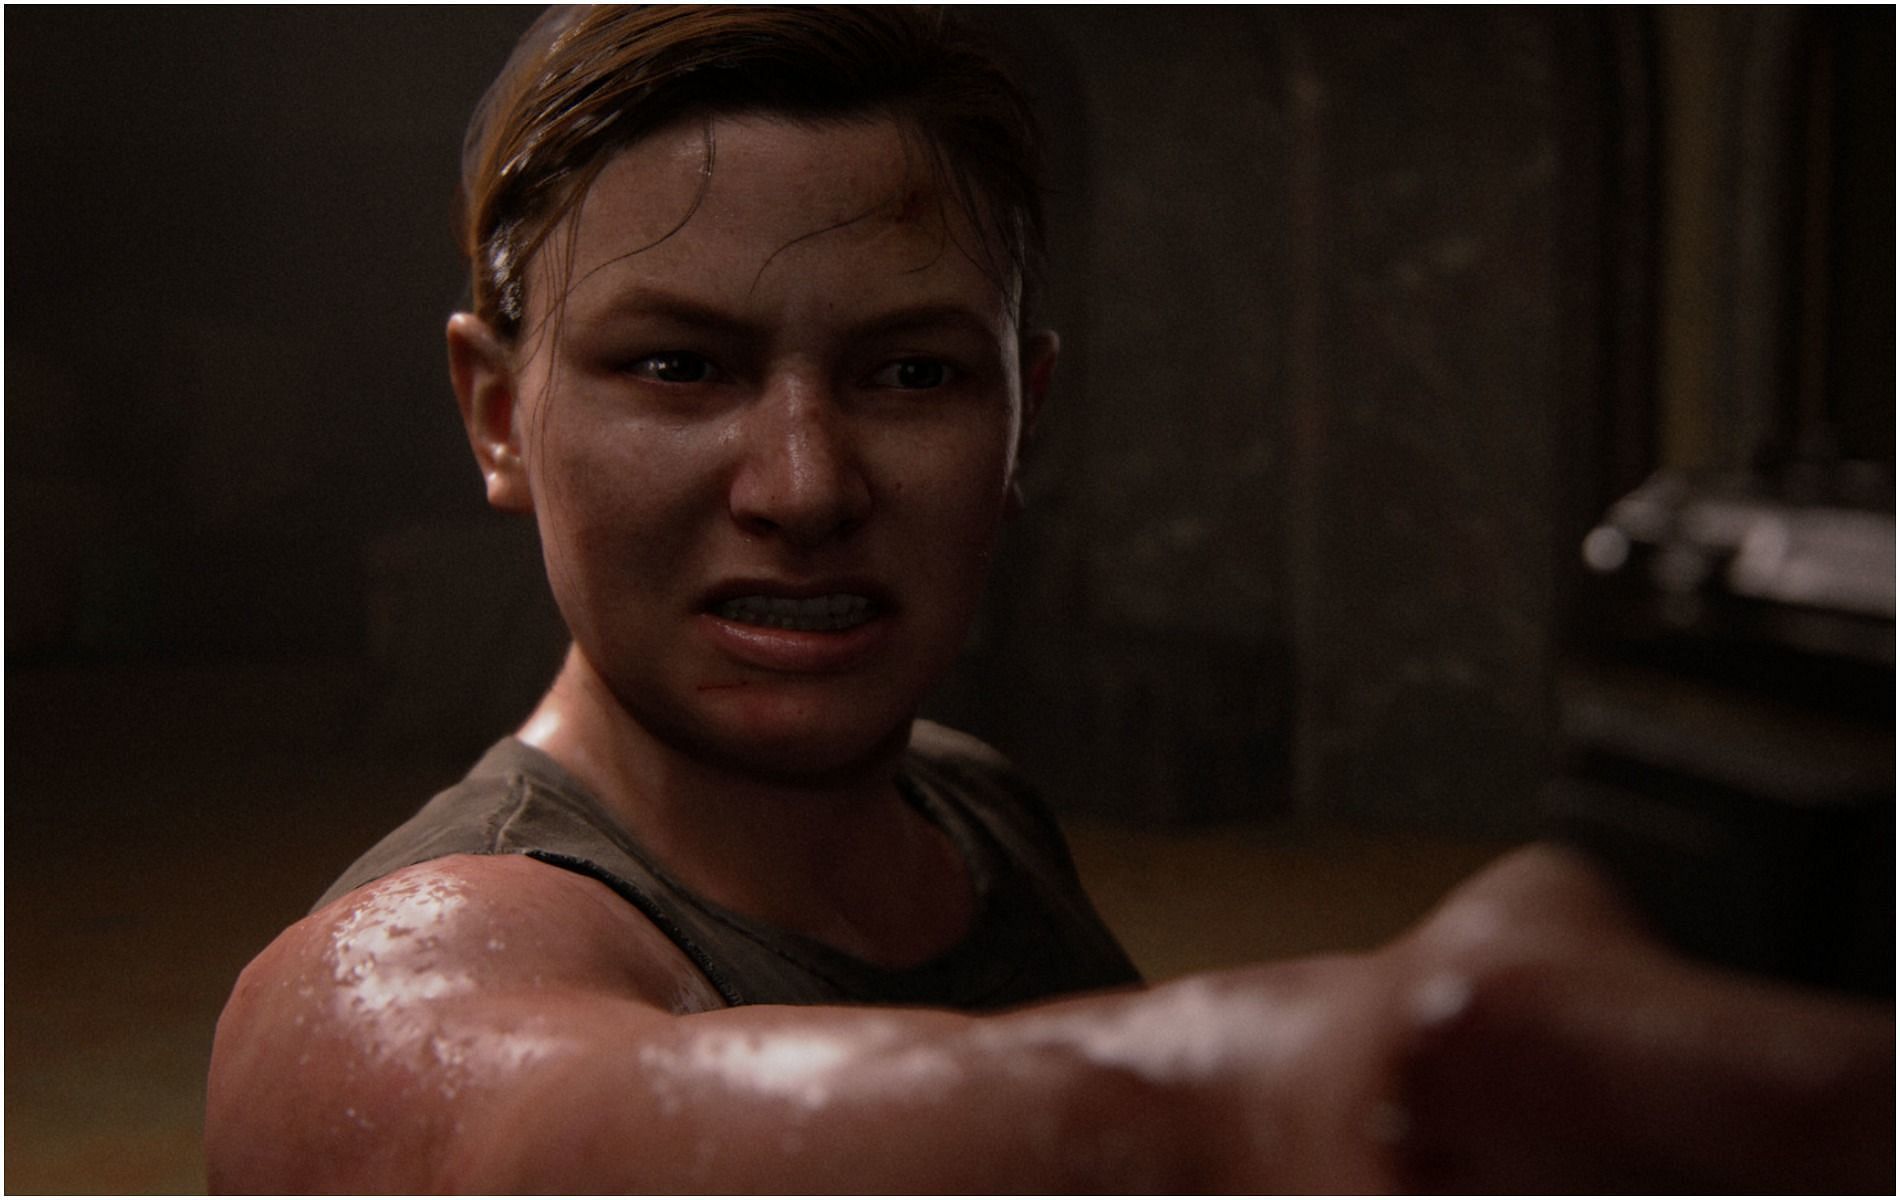 Abby points a gun at Ellie in The Last of Us Part 2 (Image via Naughty Dog)